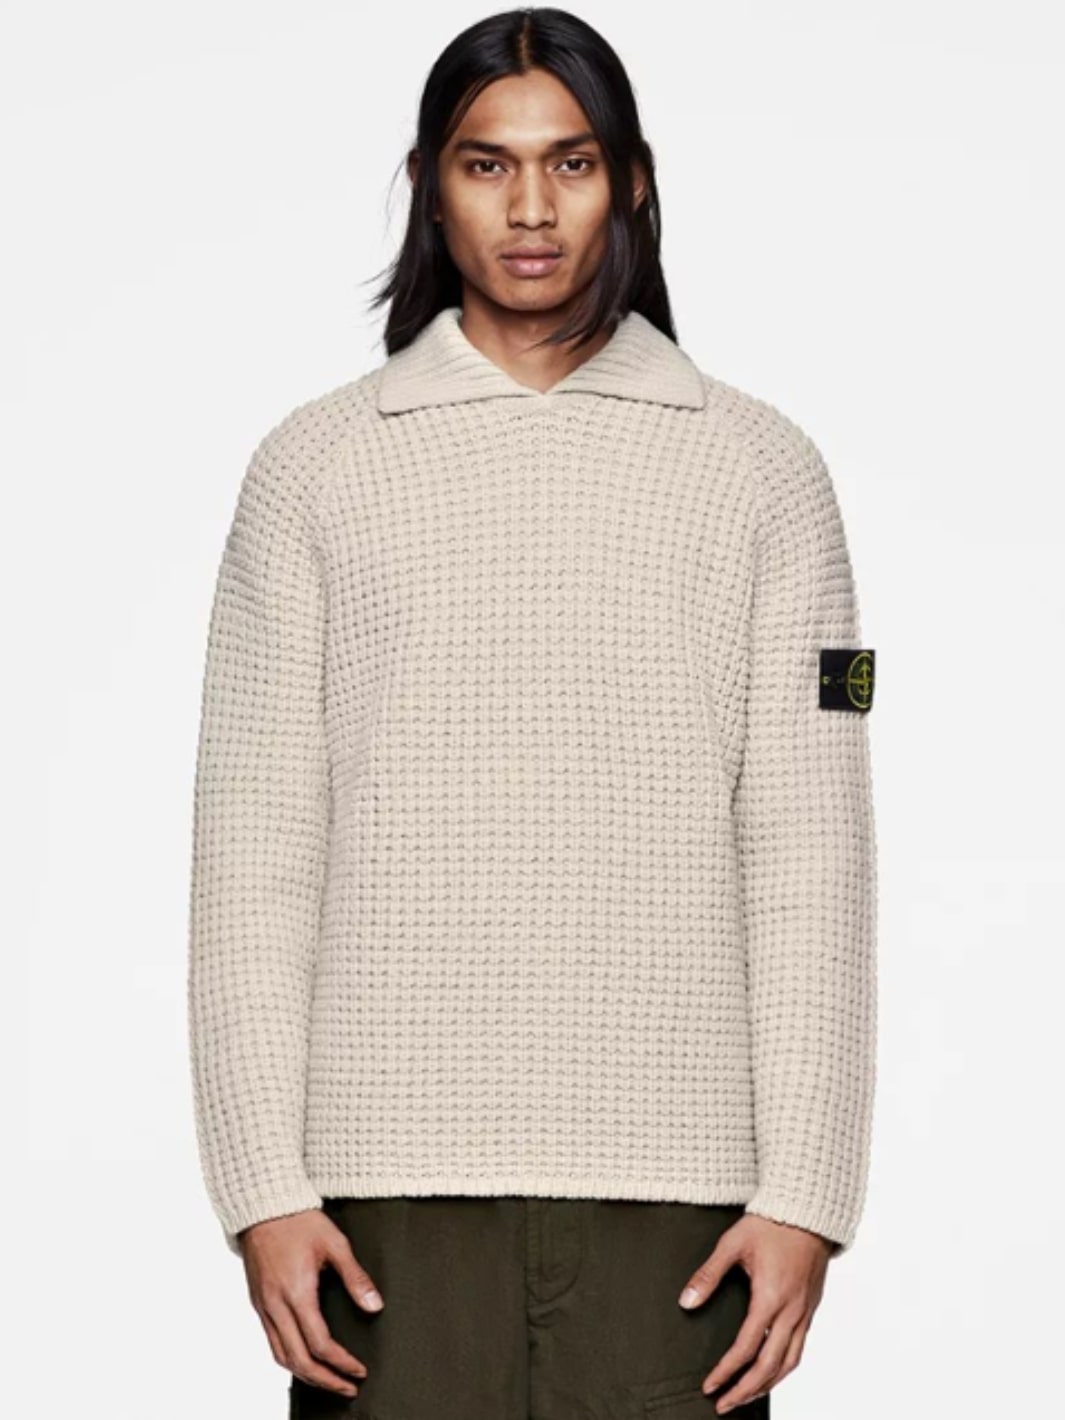 Stone Island Knit Genser | Maglia Knitted Sweater Sand